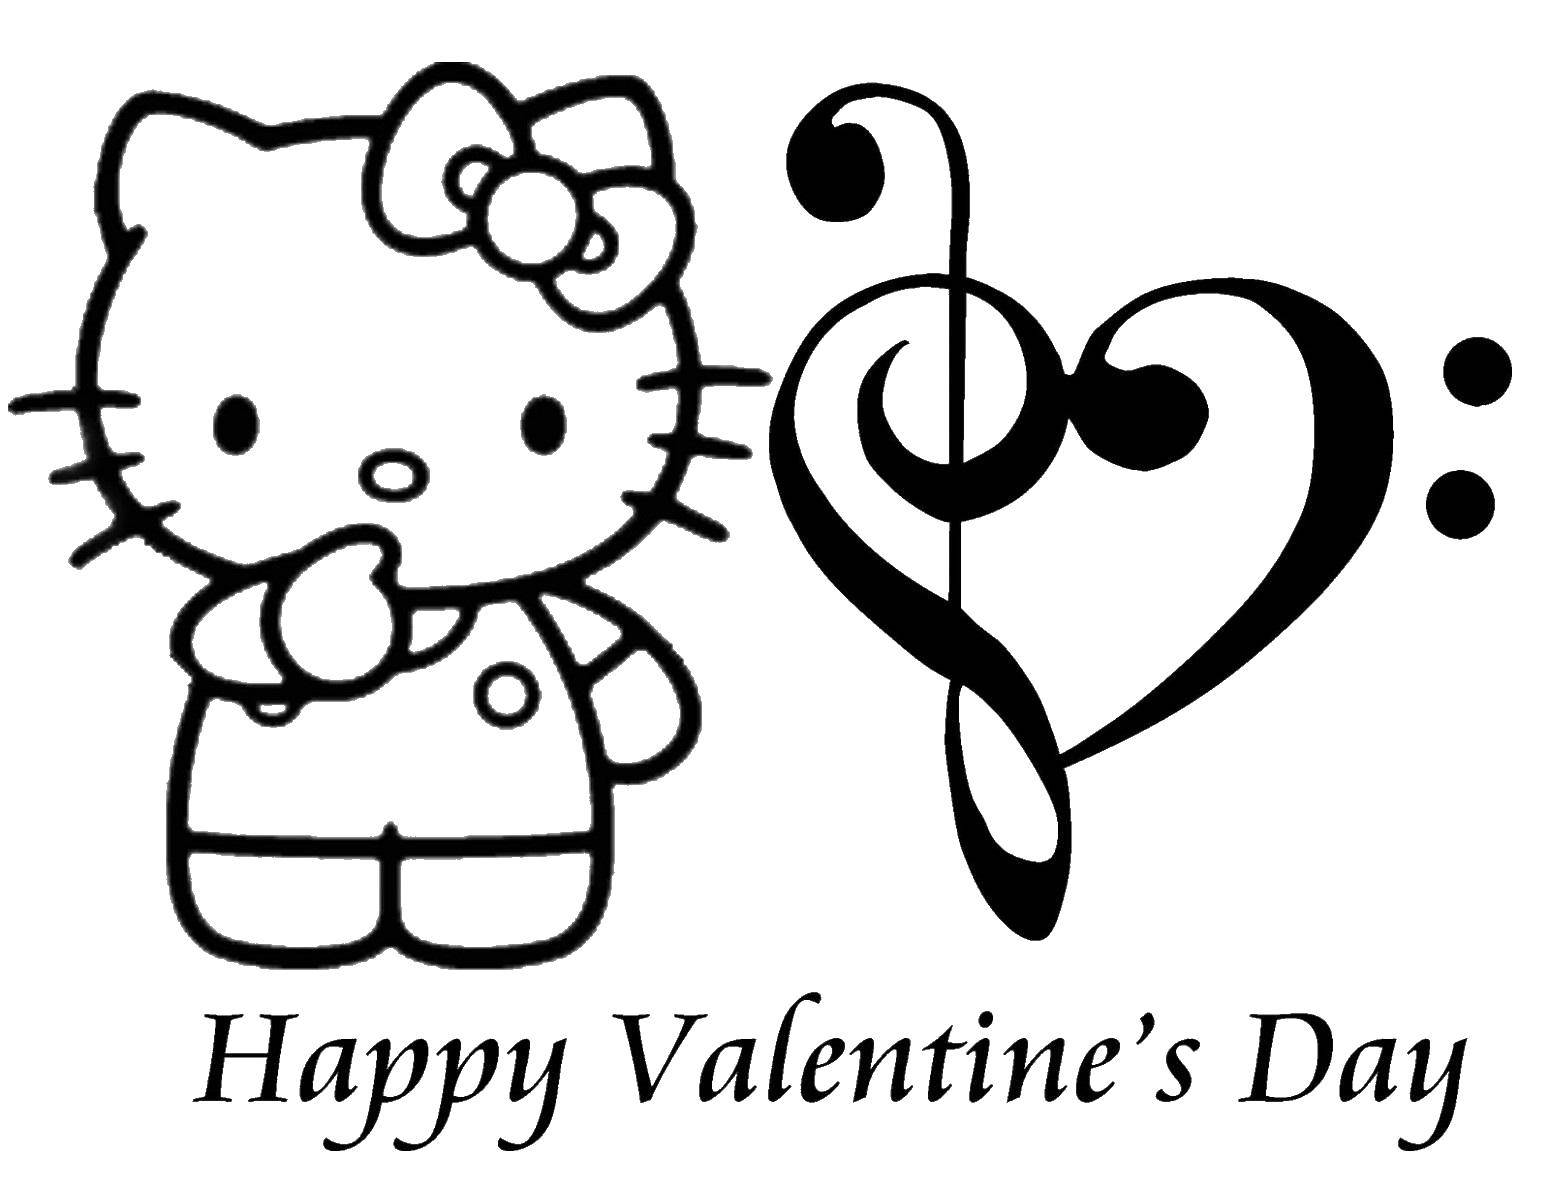 Coloring Hello kitty with heart. Category Valentines day. Tags:  postcard, Hello Kitty, treble clef.